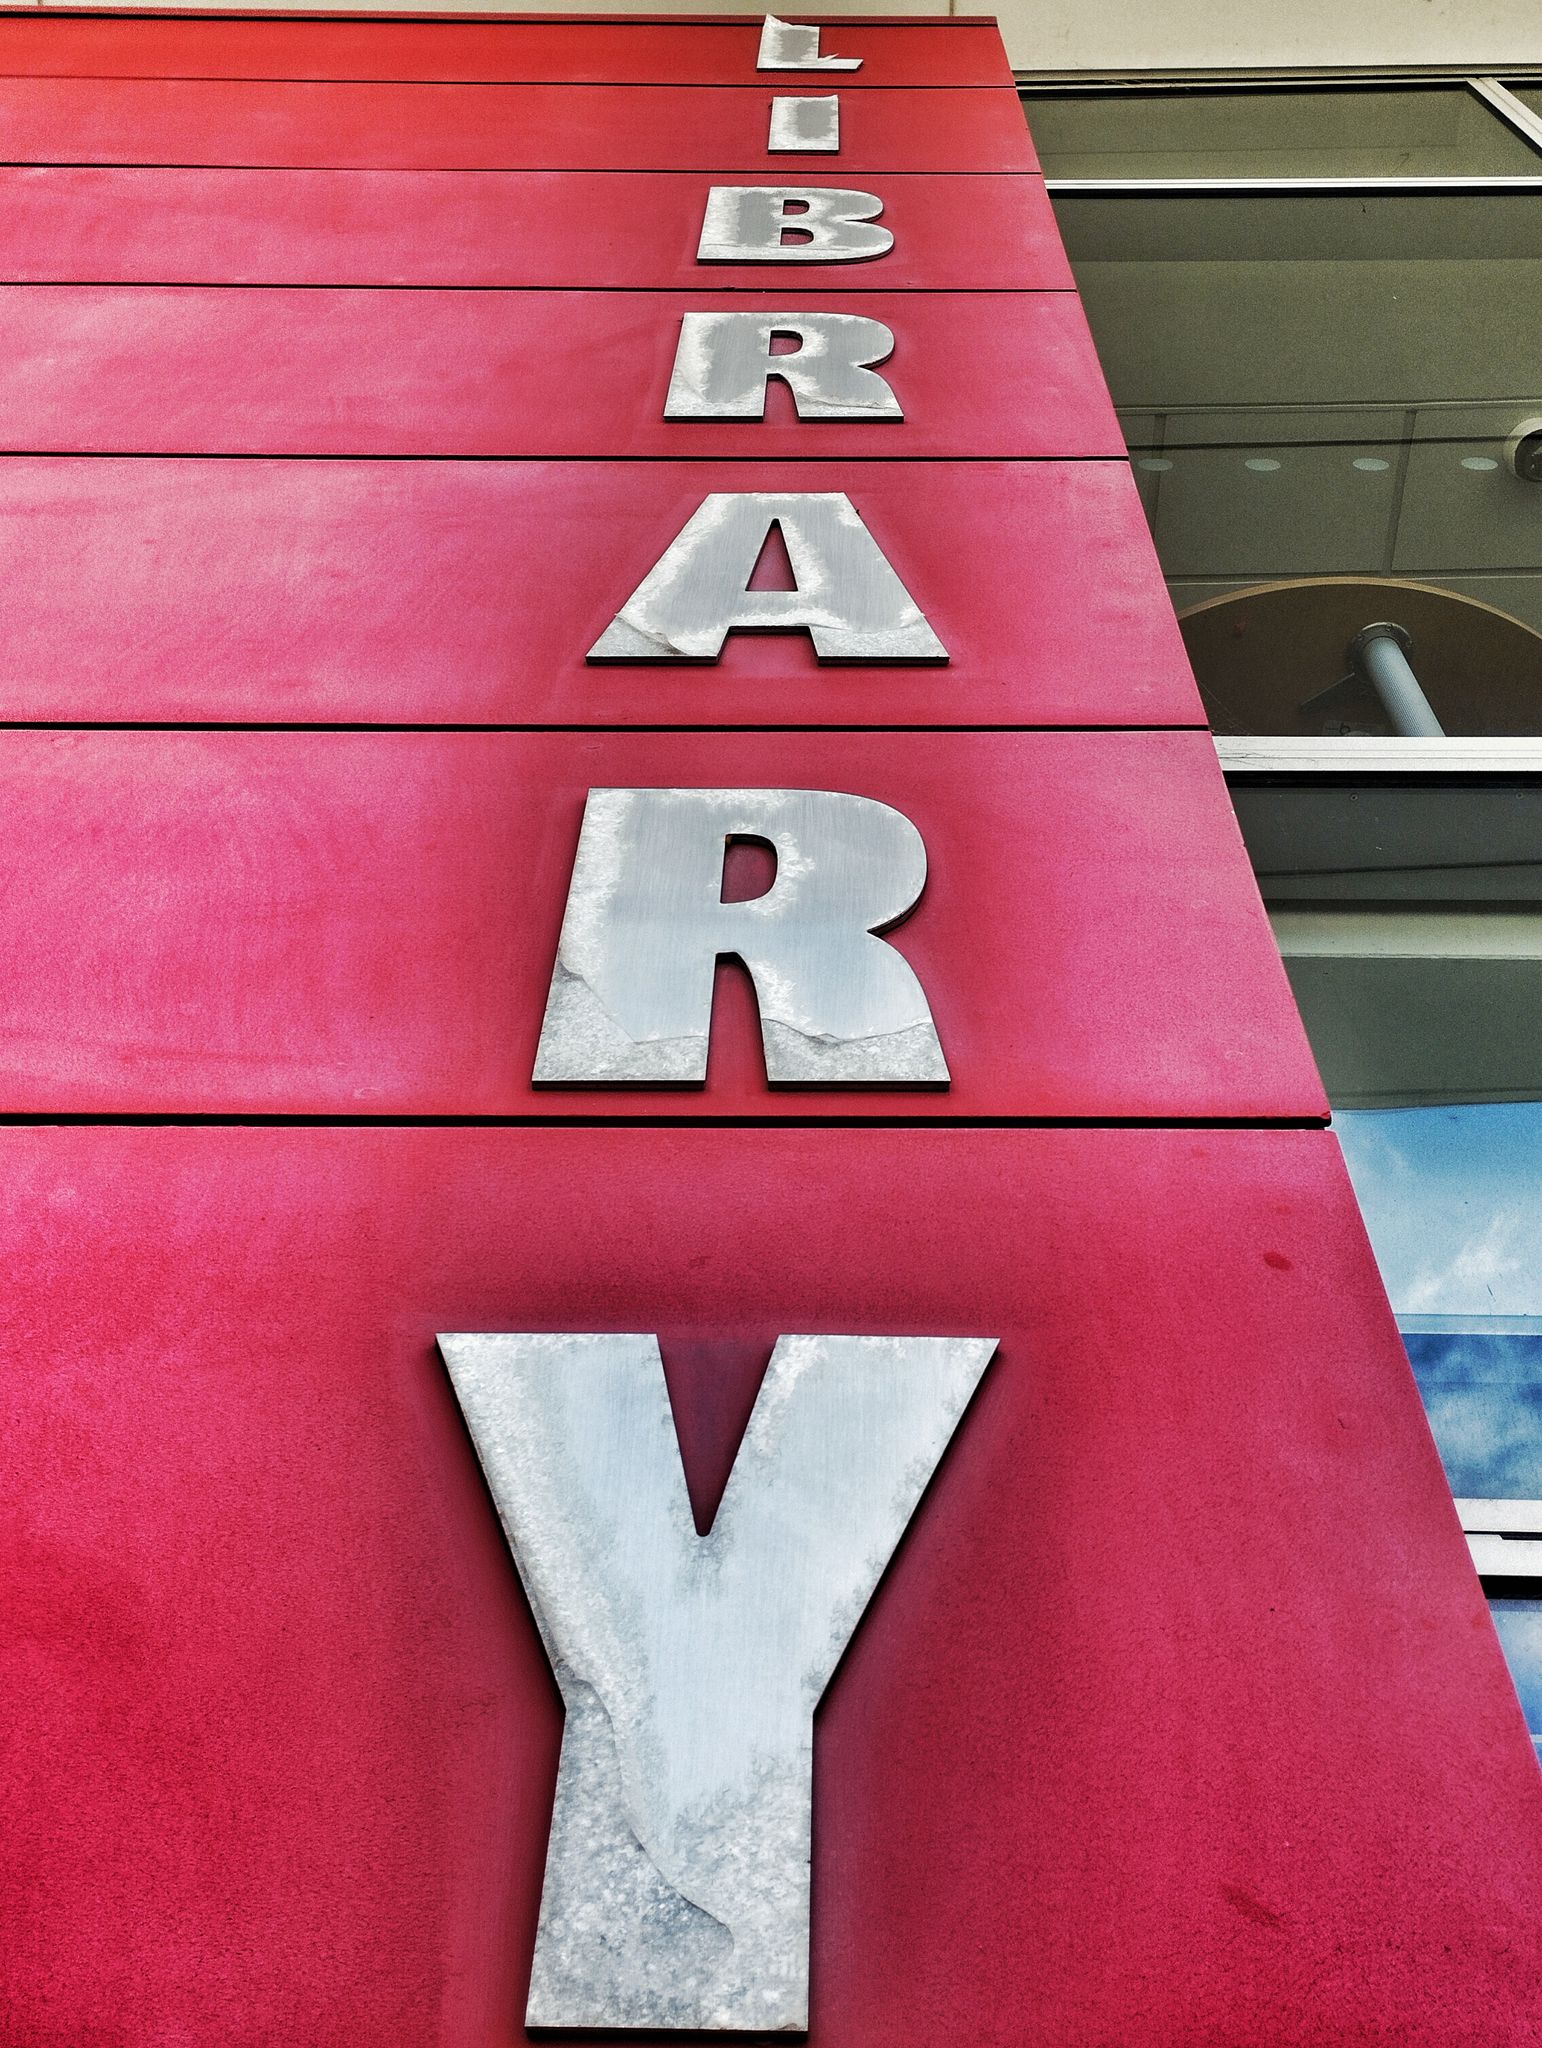 Looking upwards at the vertical word 'Library' on a red background.